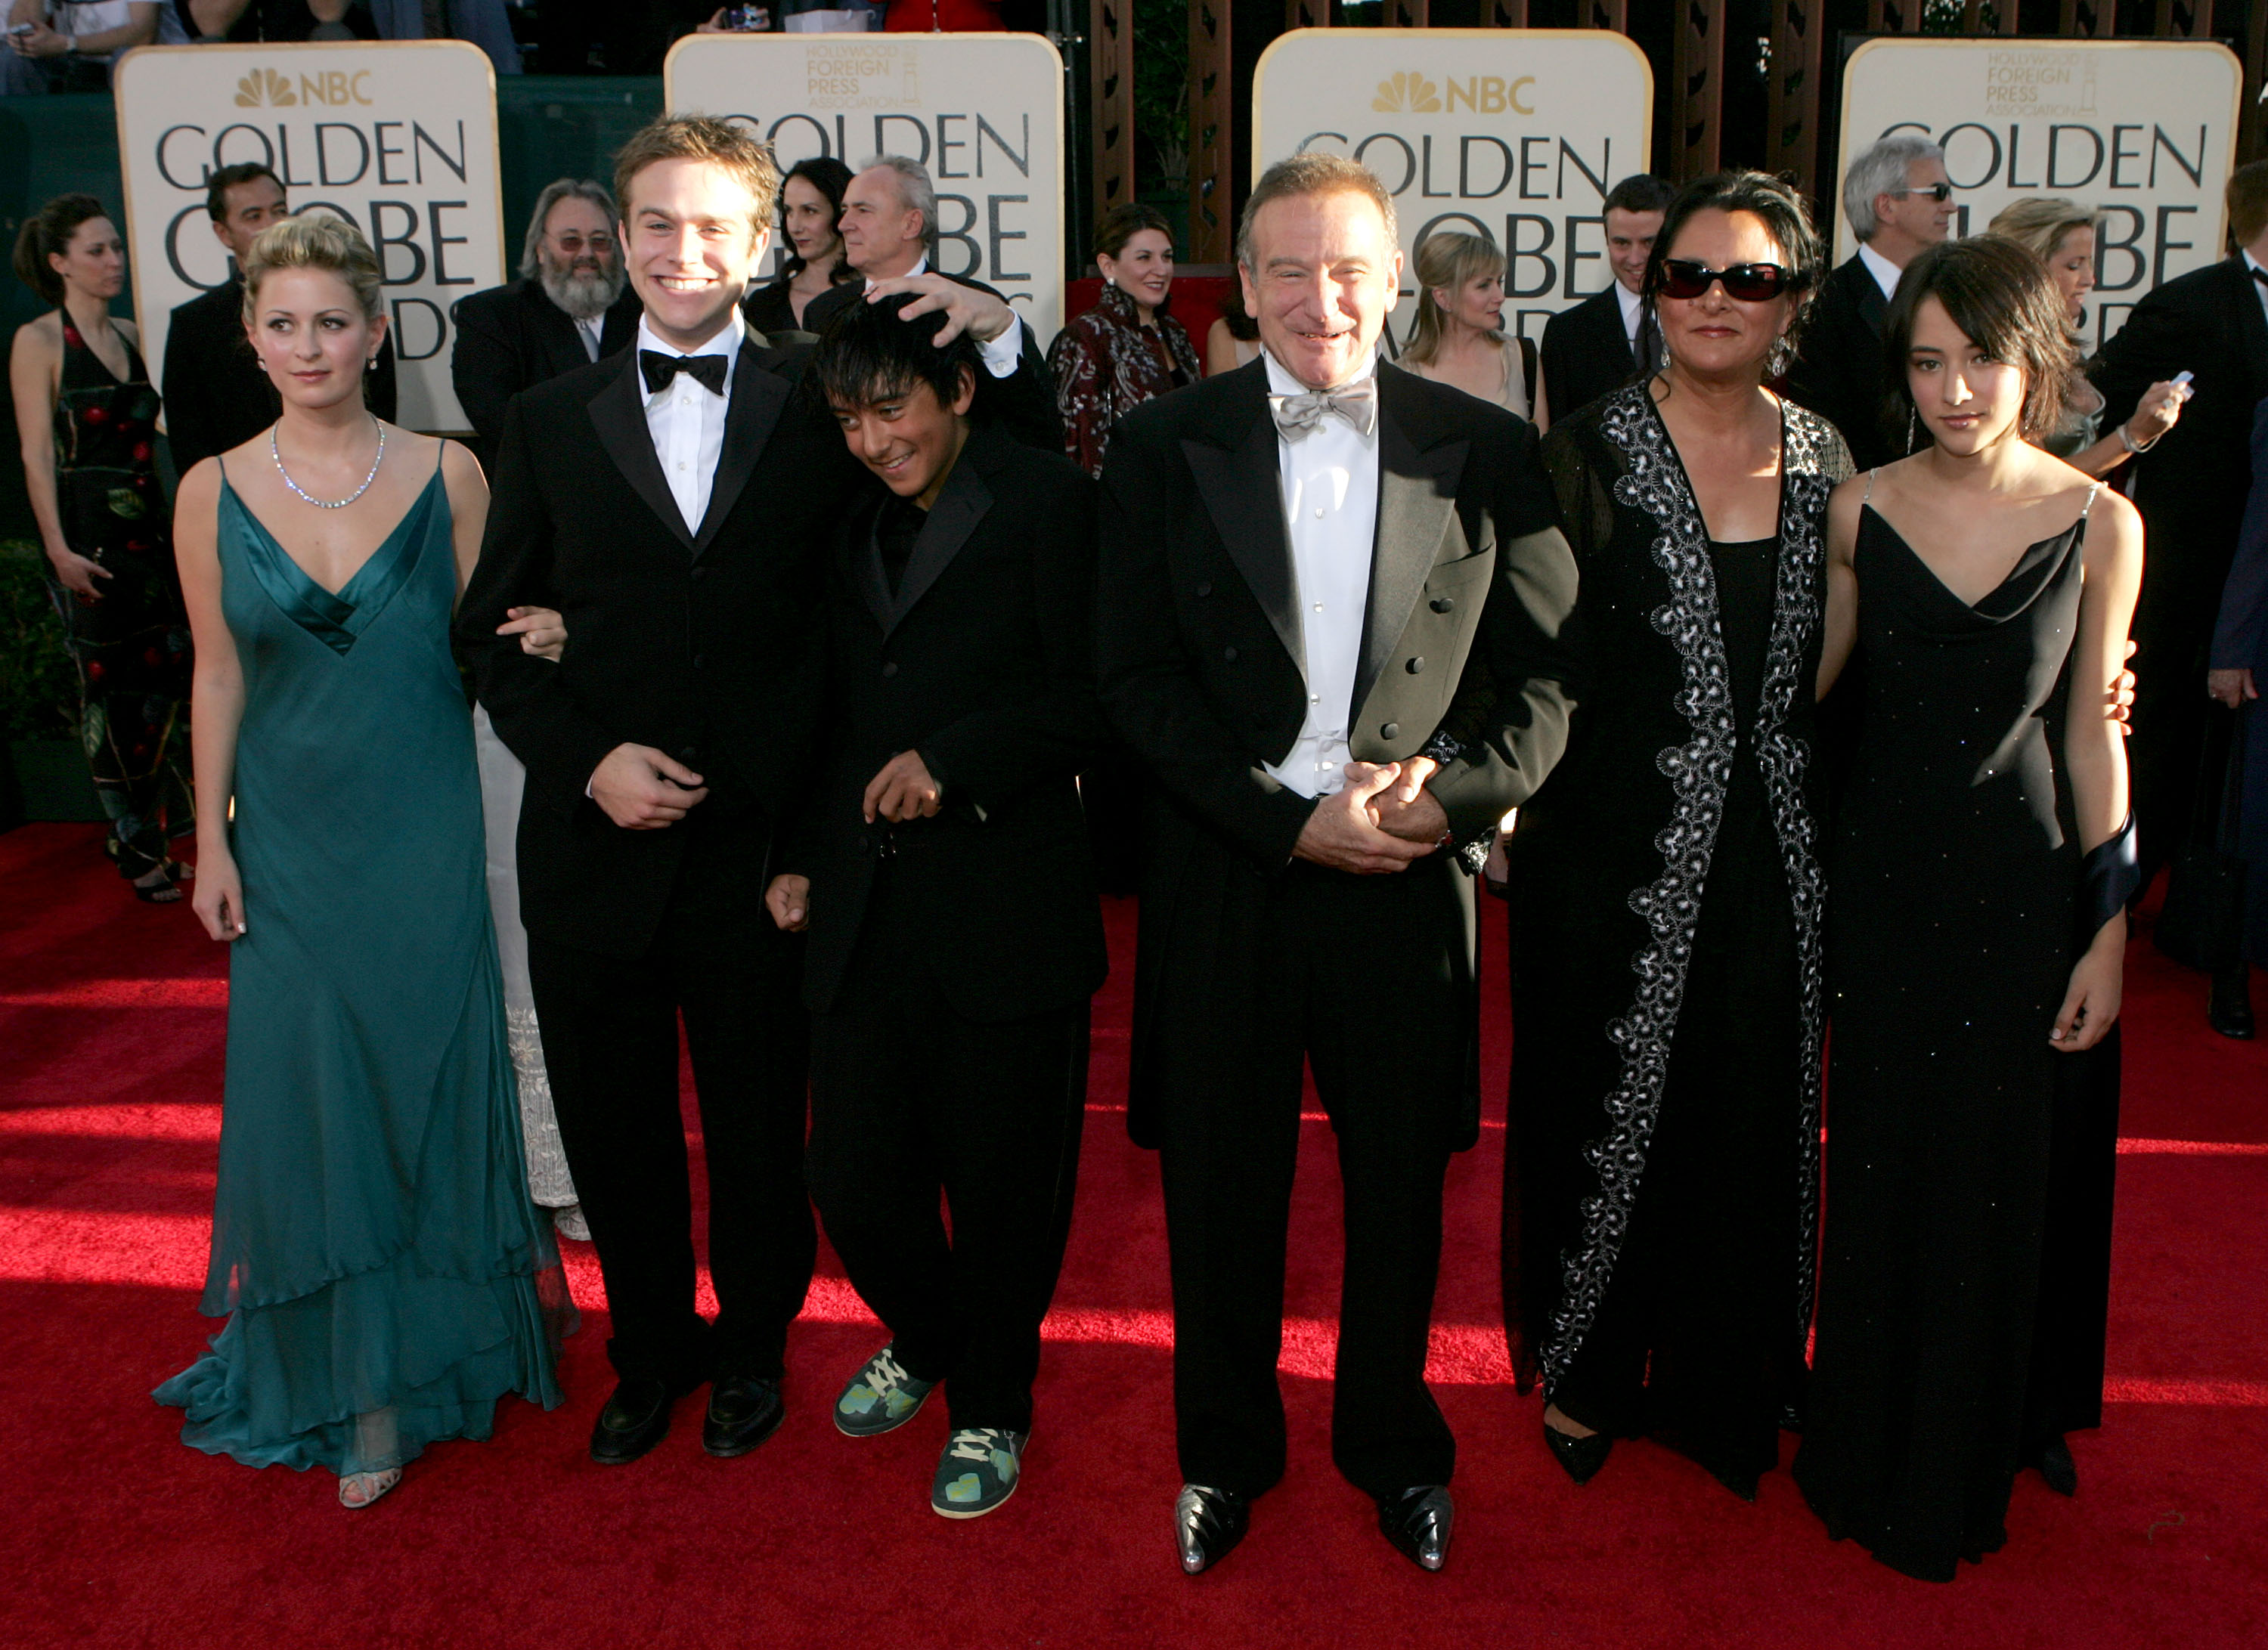 Robin Williams, Marsha Williams, Cody, Zachary, Alex, and Zelda at the 62nd Annual Golden Globe Awards in Beverly Hills, California on January 16, 2005 | Source: Getty Images